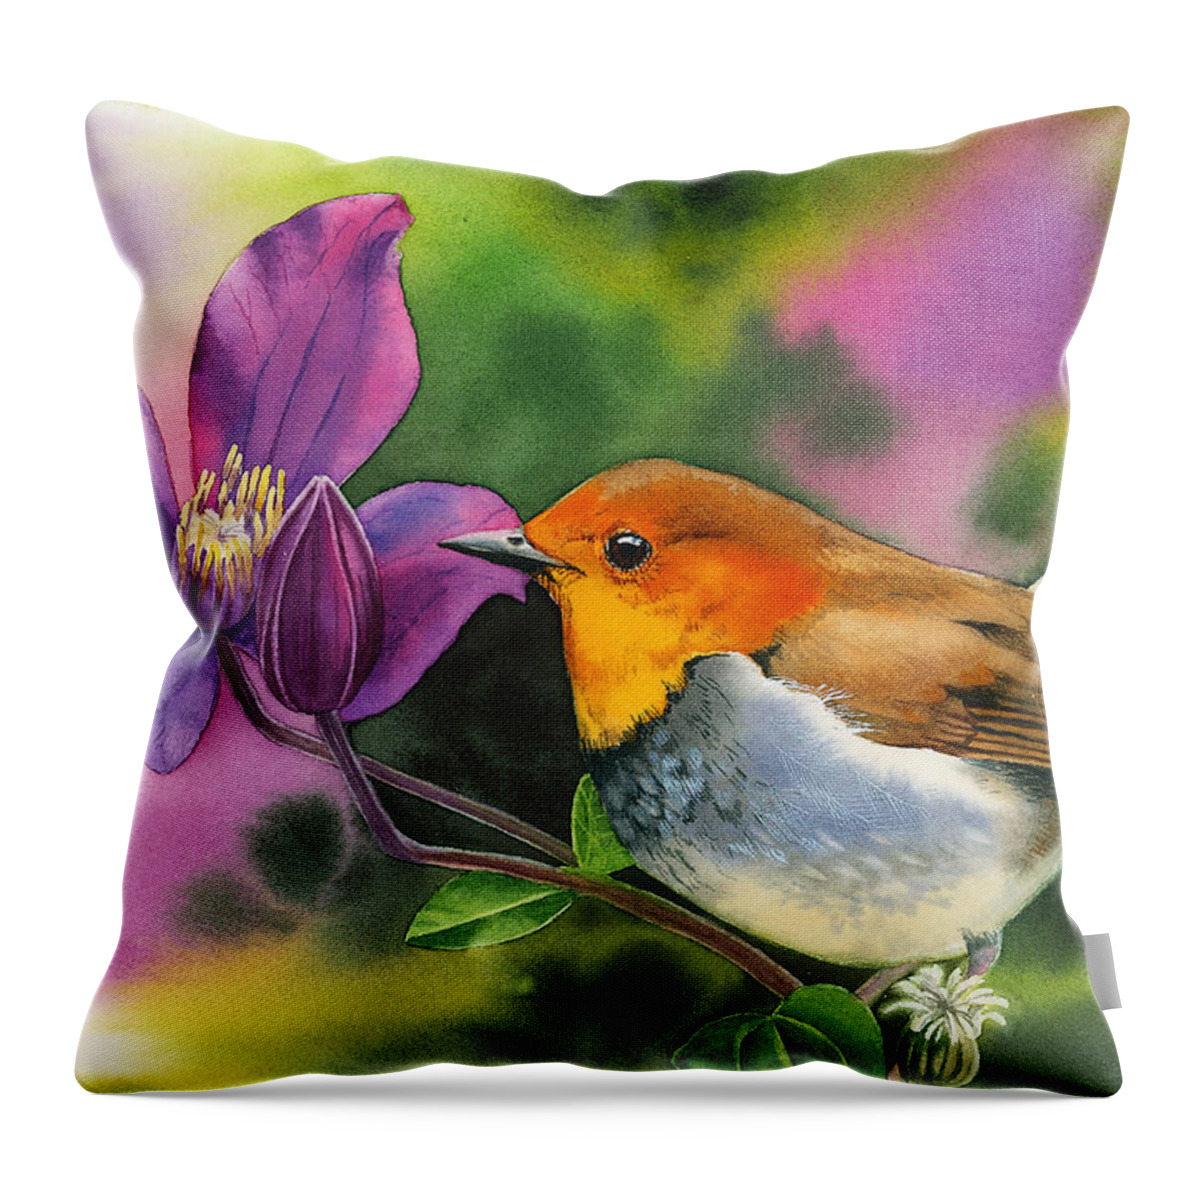 Robin Throw Pillow featuring the painting Robin by Espero Art